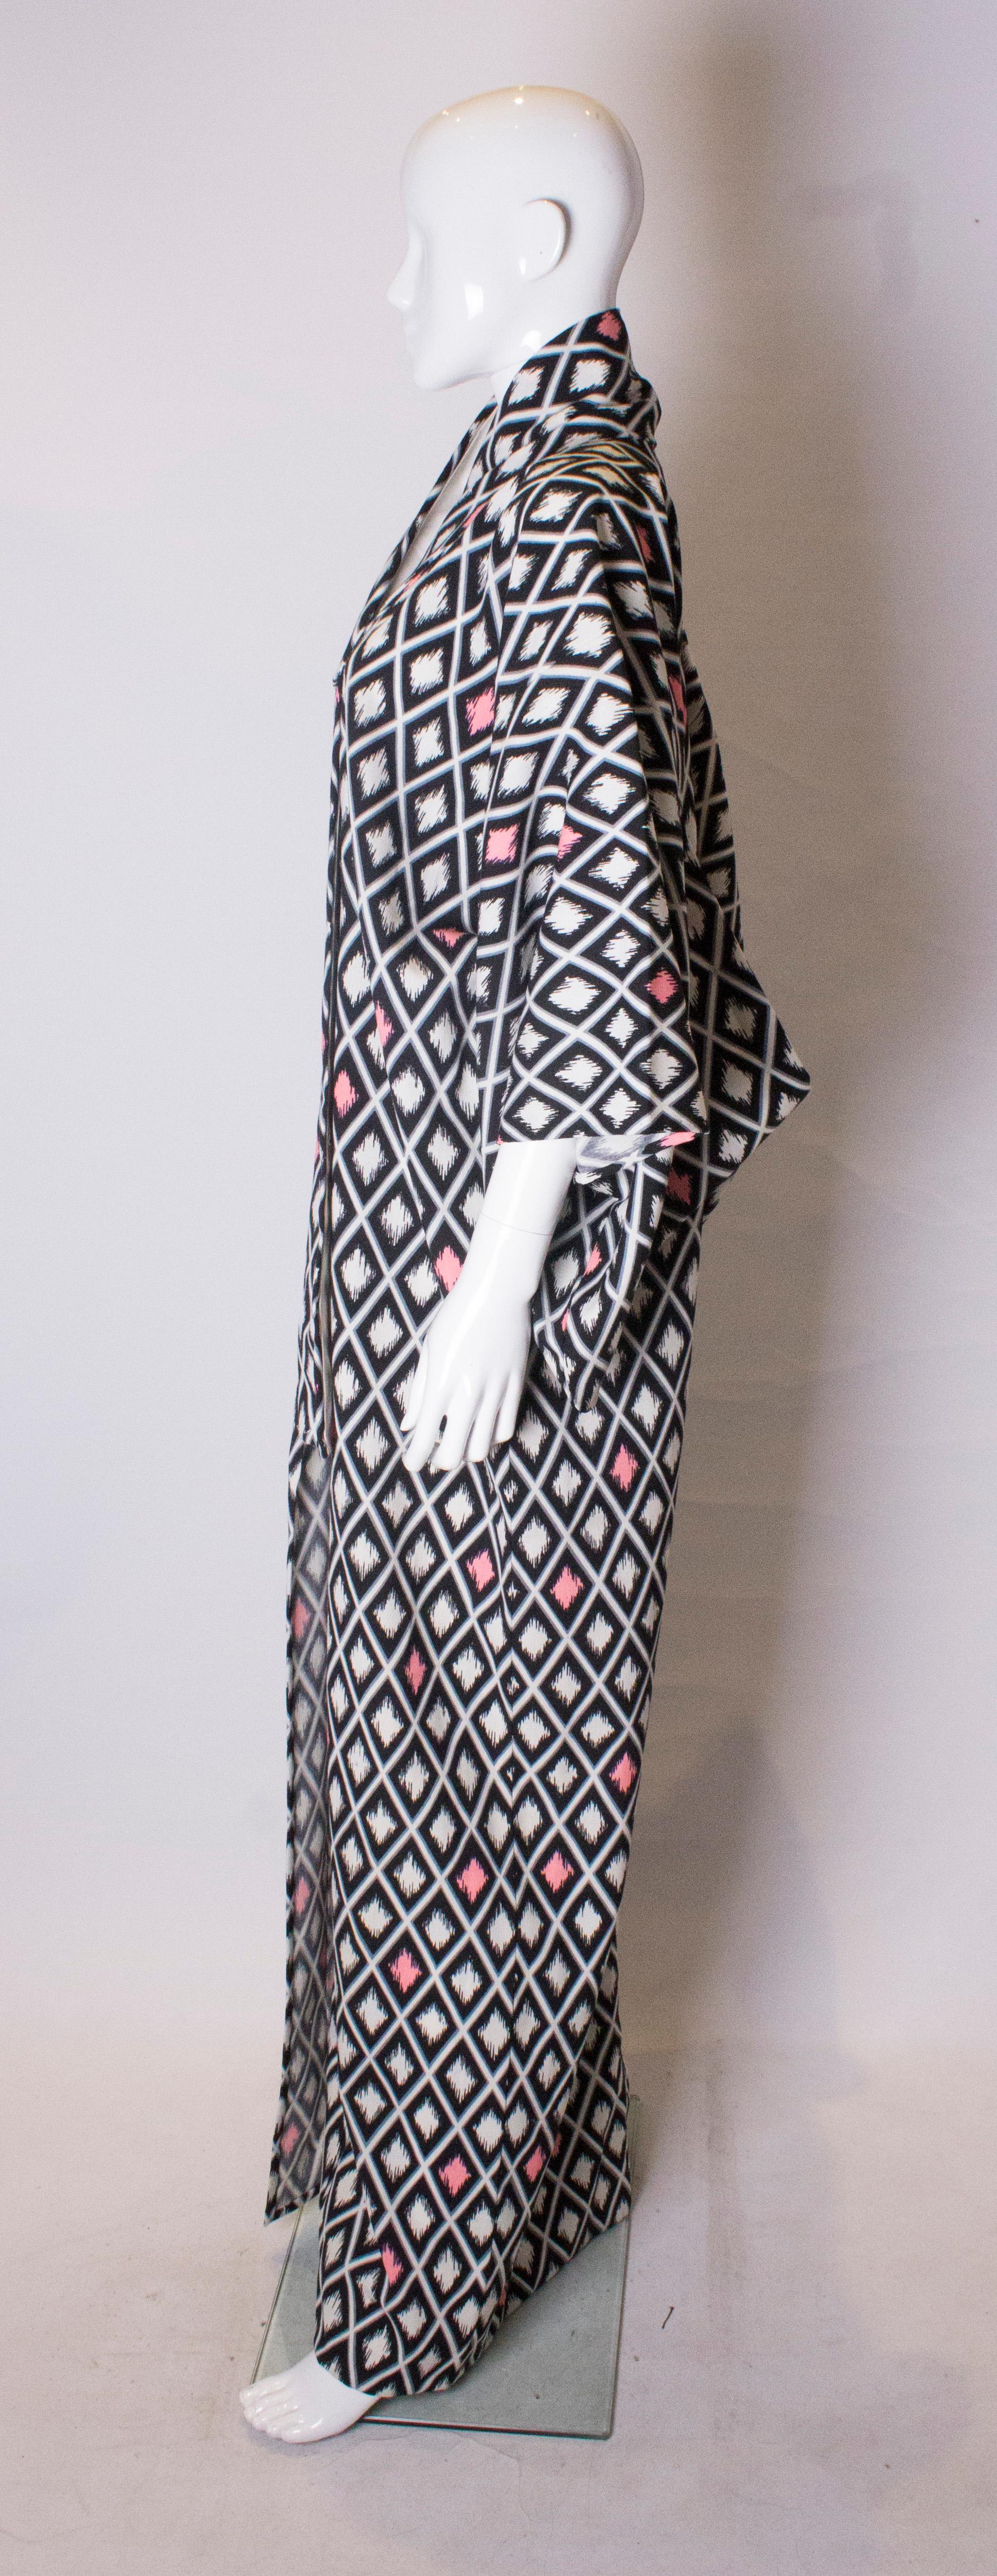 A great cotton kimono , made in Kyoto in the 1980s. The kimono hssa geometric print in white, pink and black.,and is hand sewn.
Measurements; bust up to 48'',length  63''.